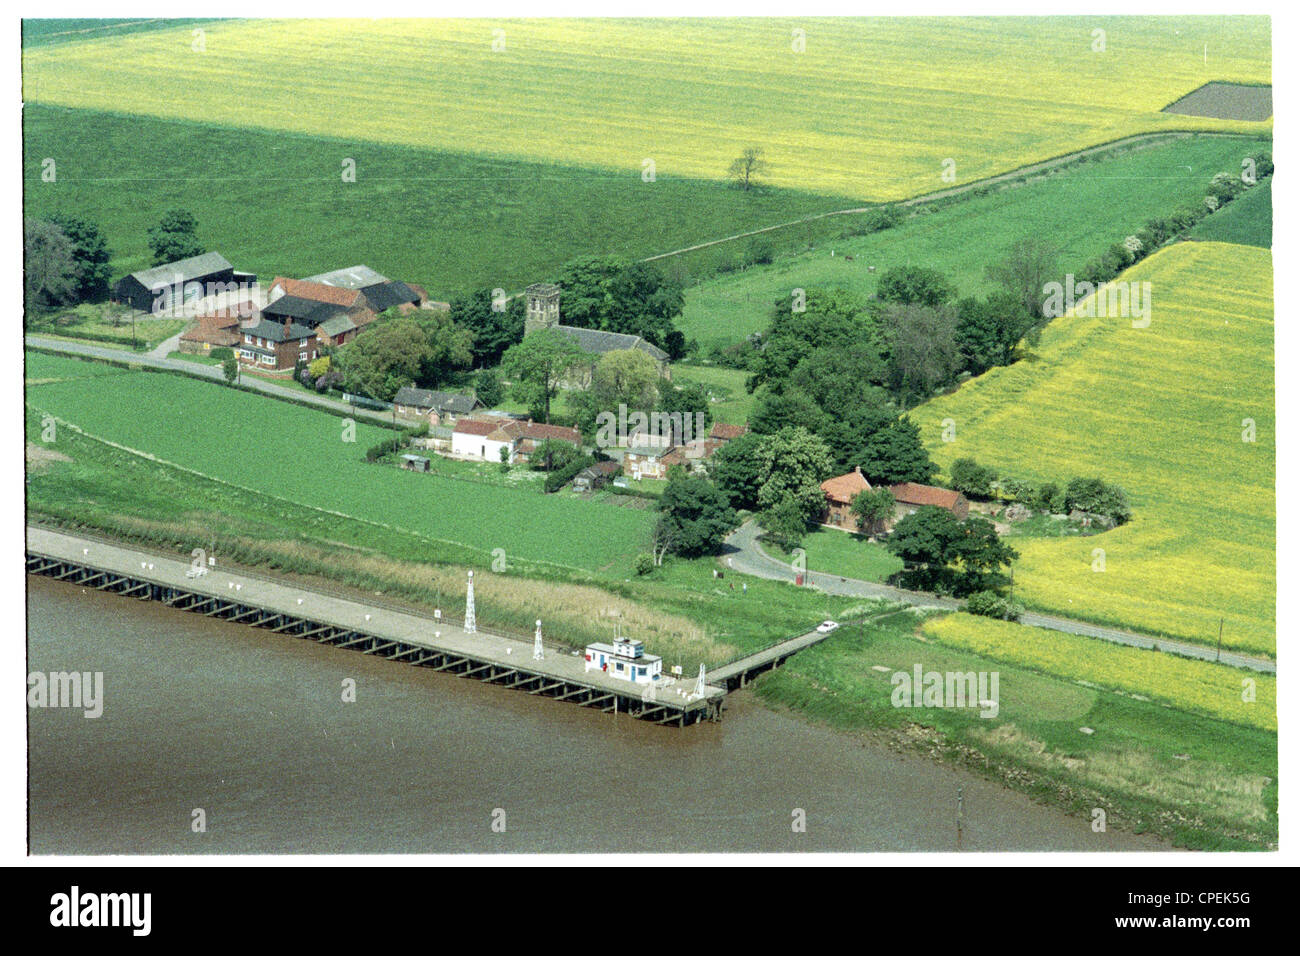 Aerial view of Blacktoft Jetty managed by associated British ports located on the humber estuary Stock Photo